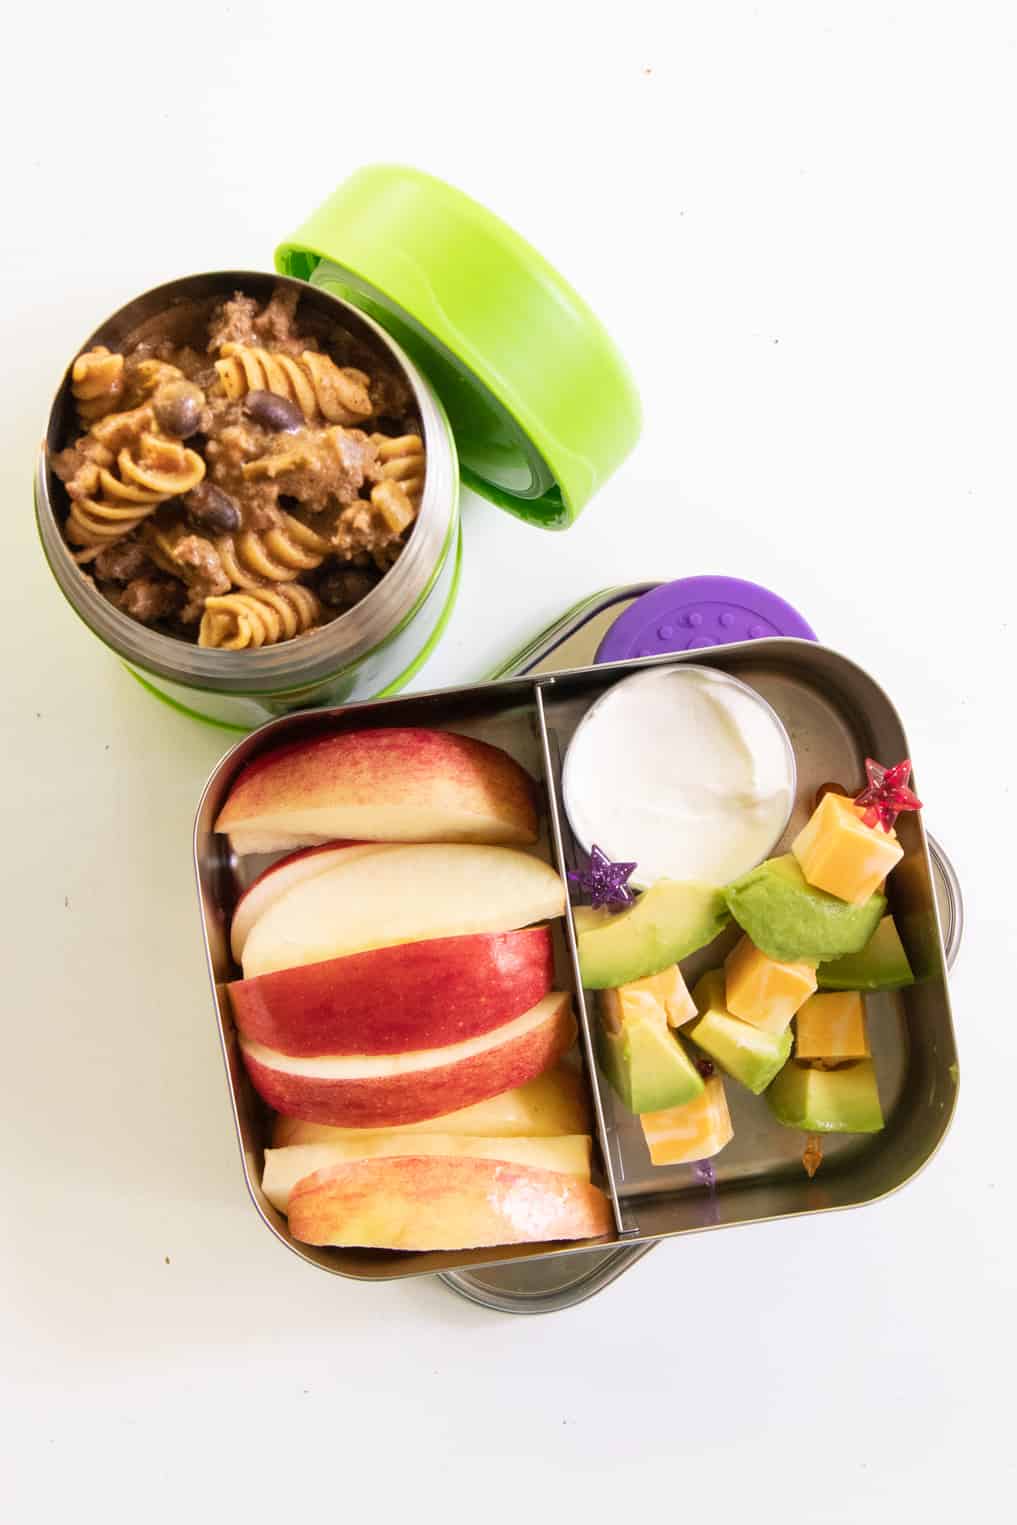 Stainless steel lunchbox with fruit and cheese and avocado skewers, next to a Thermos of taco macaroni skillet.